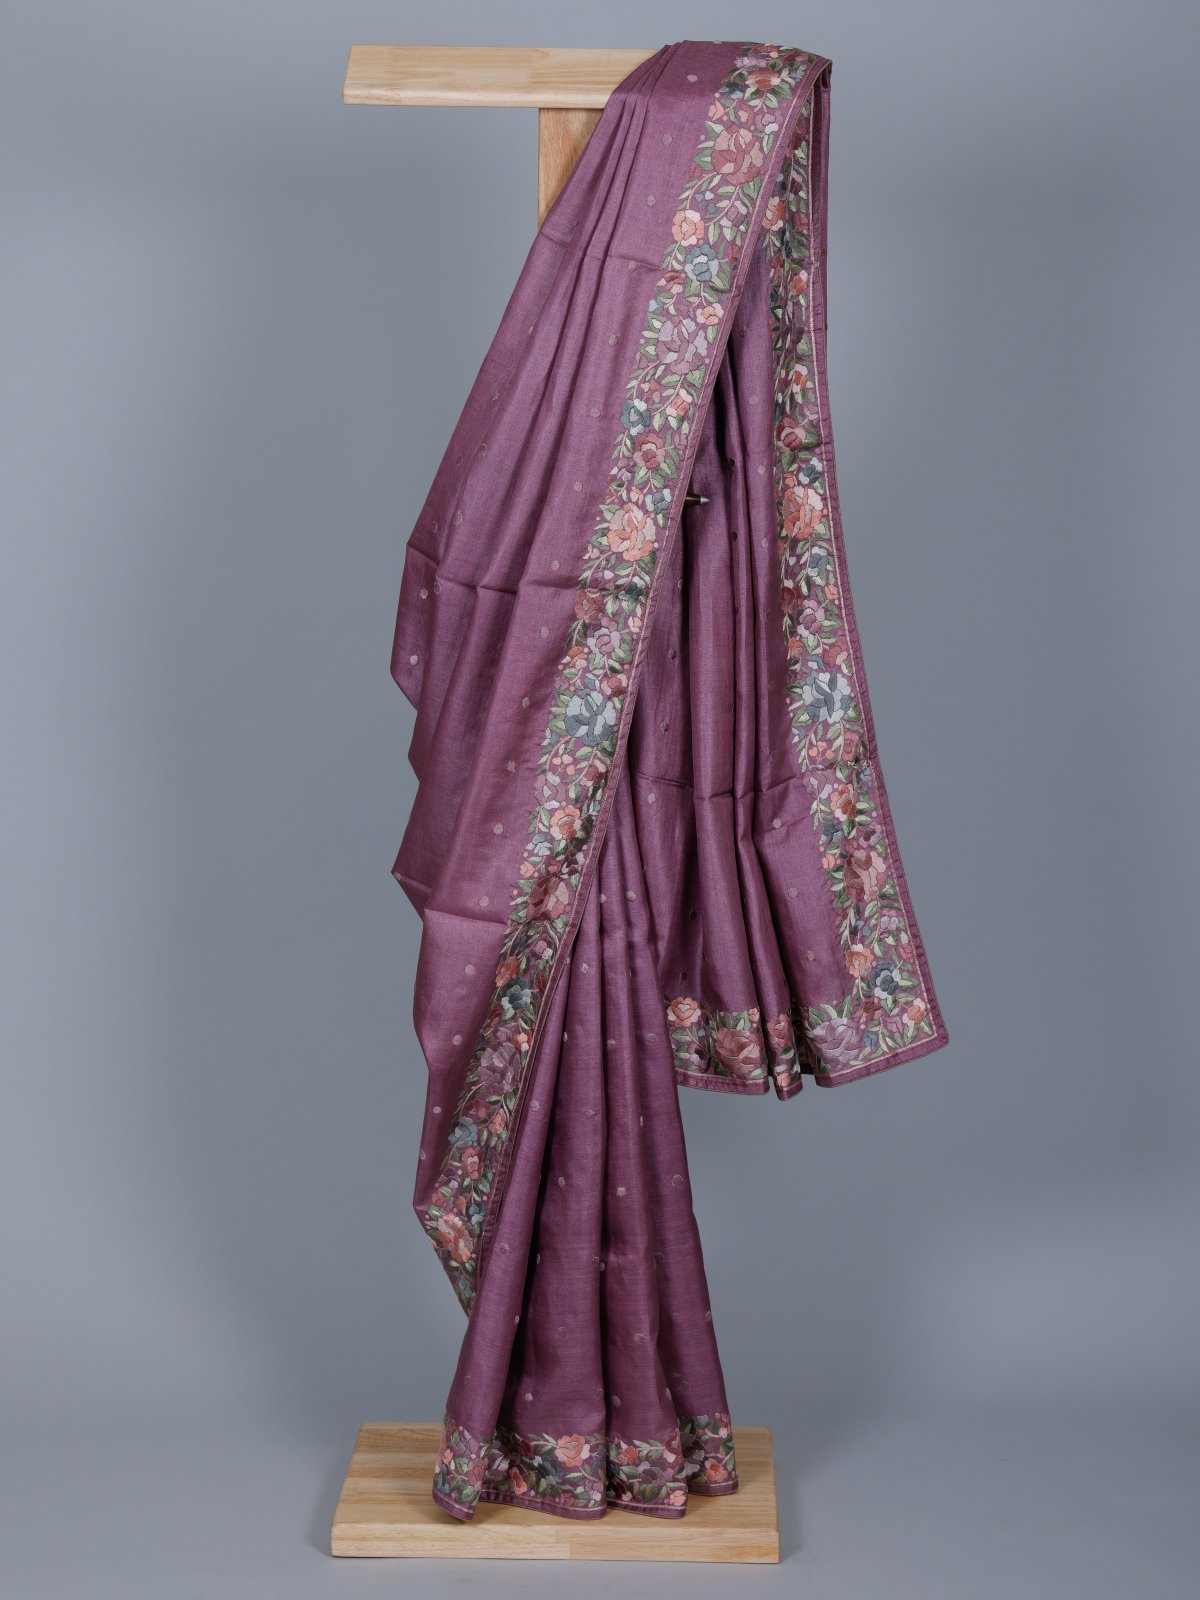 Pastel Lavender Tussar Silk Saree with Floral Embroidery Border